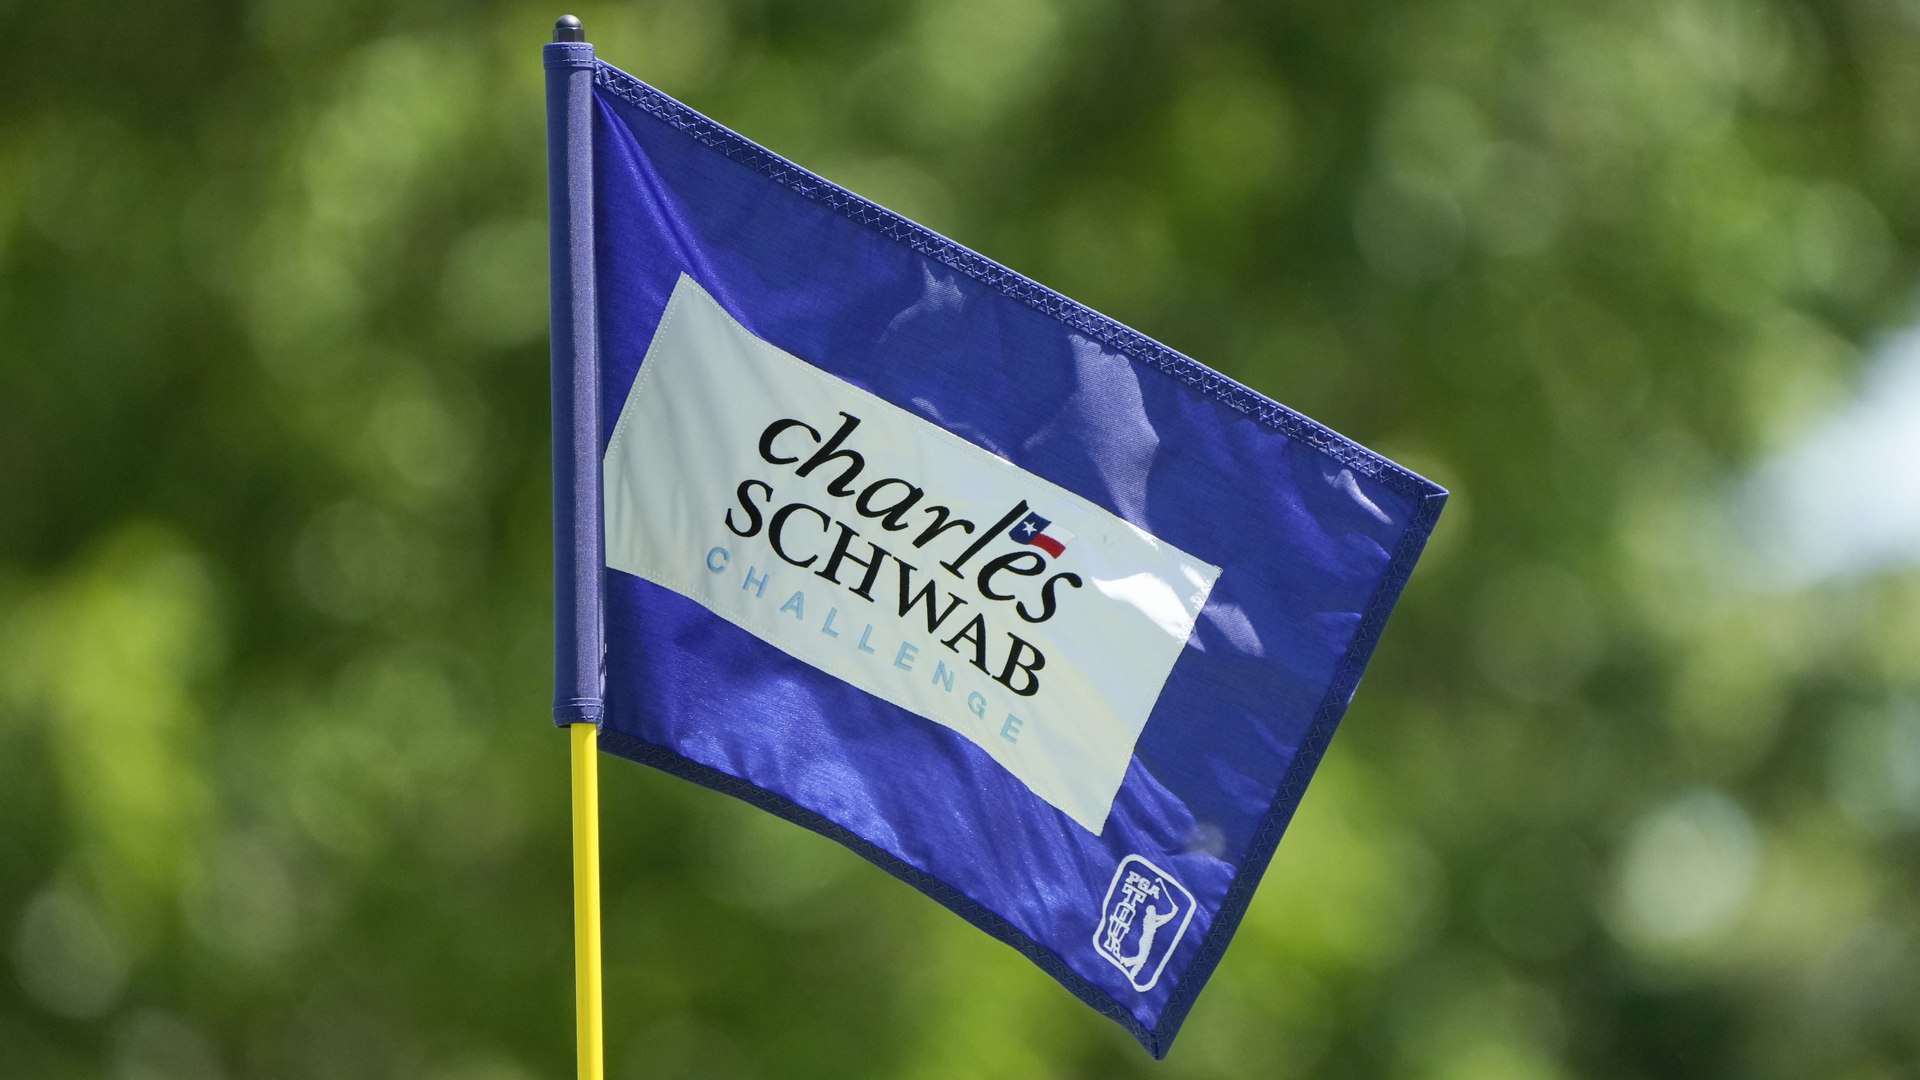 Charles Schwab Challenge Course Preview: Colonial Country Club